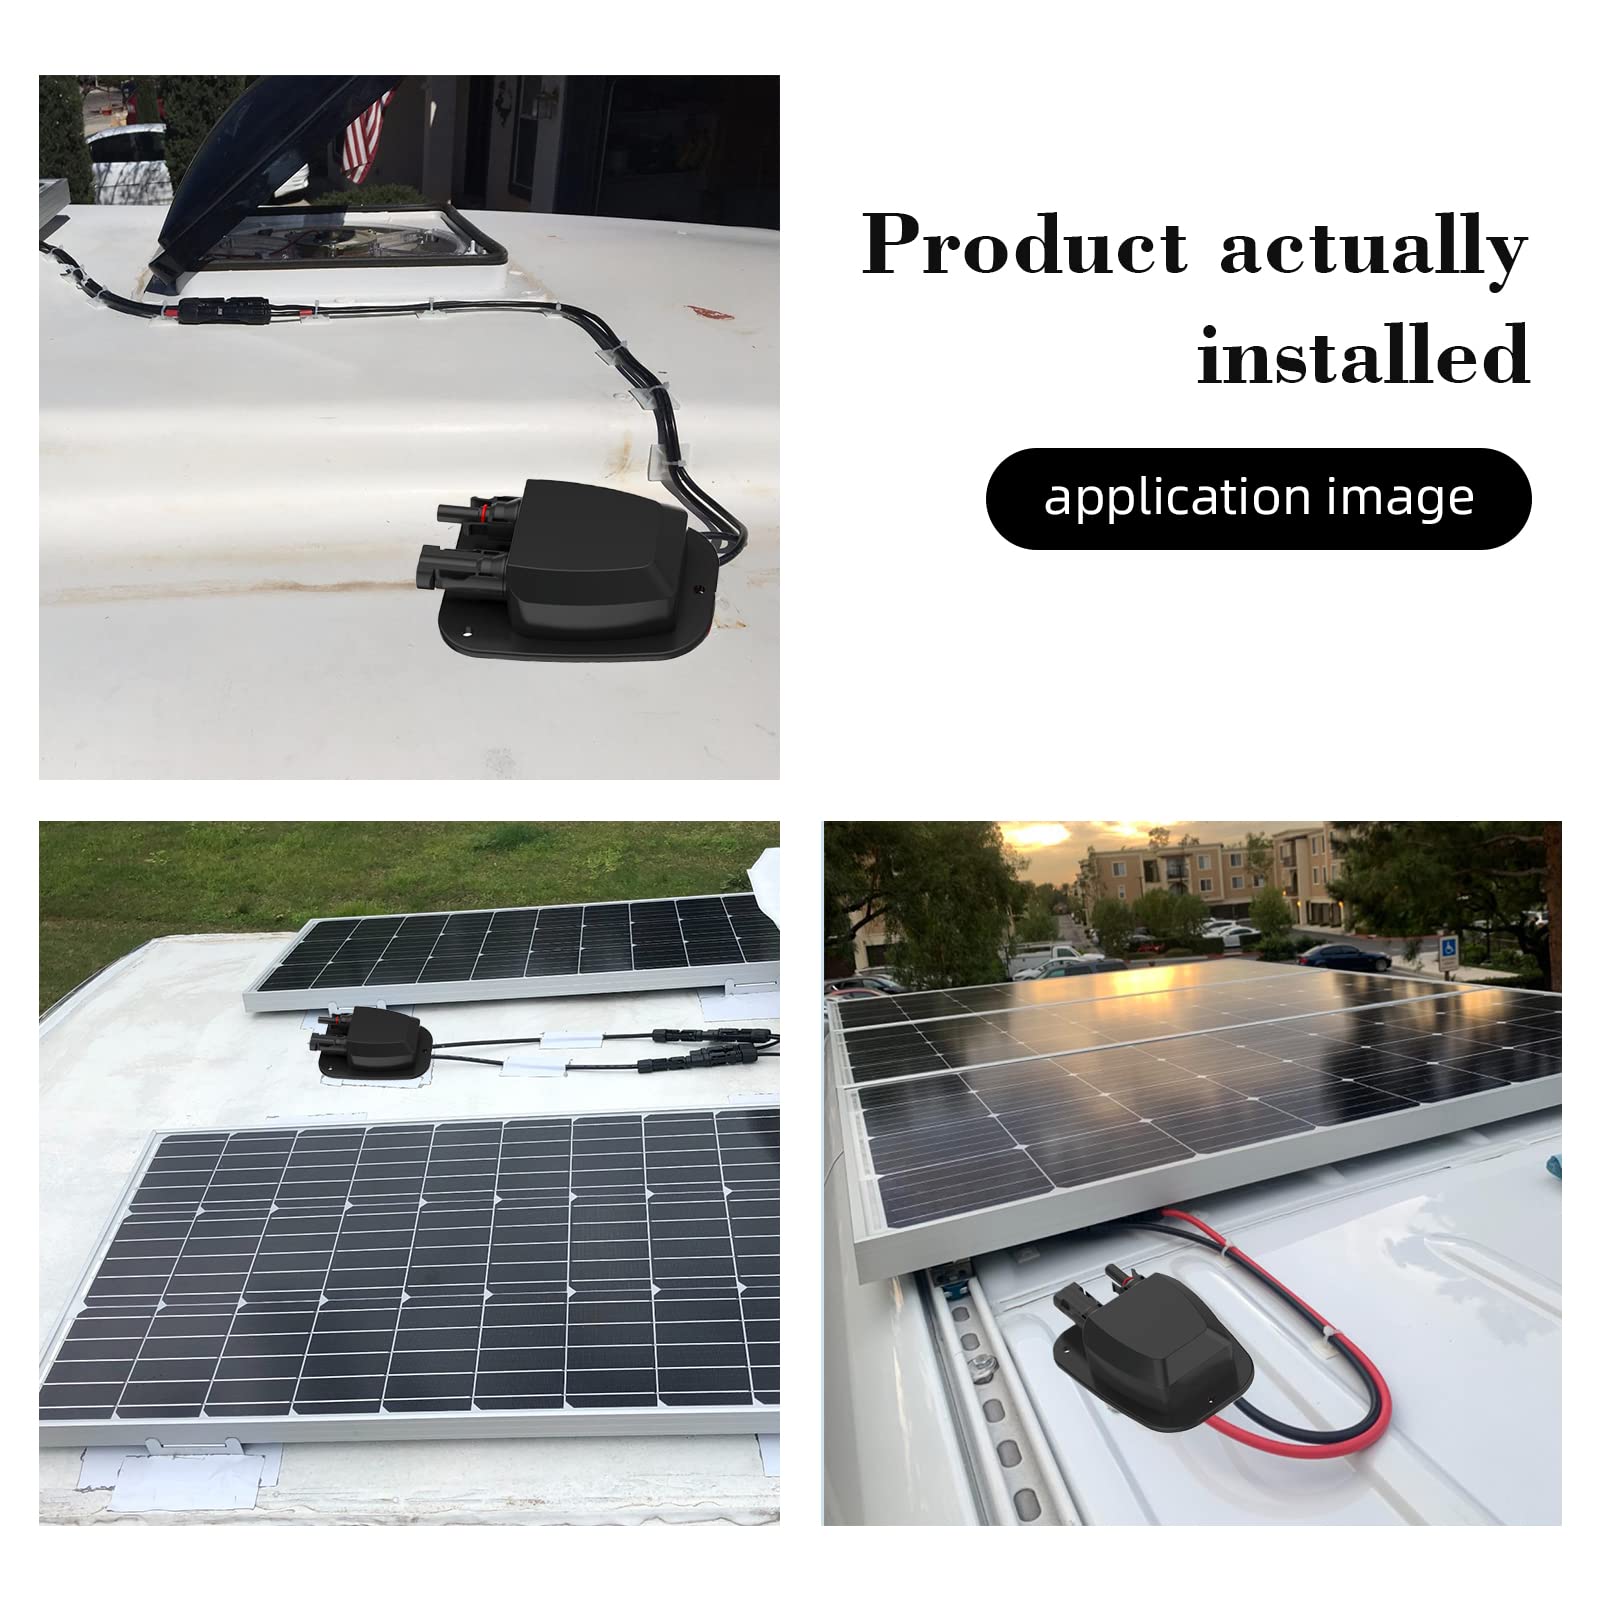 Solar Weatherproof Entry Gland Entry Housing, Through RV roof Solar Entry housing with 10AWG Solar Extension Cable Solar Connector Solar Project on RV, Campervan, Van